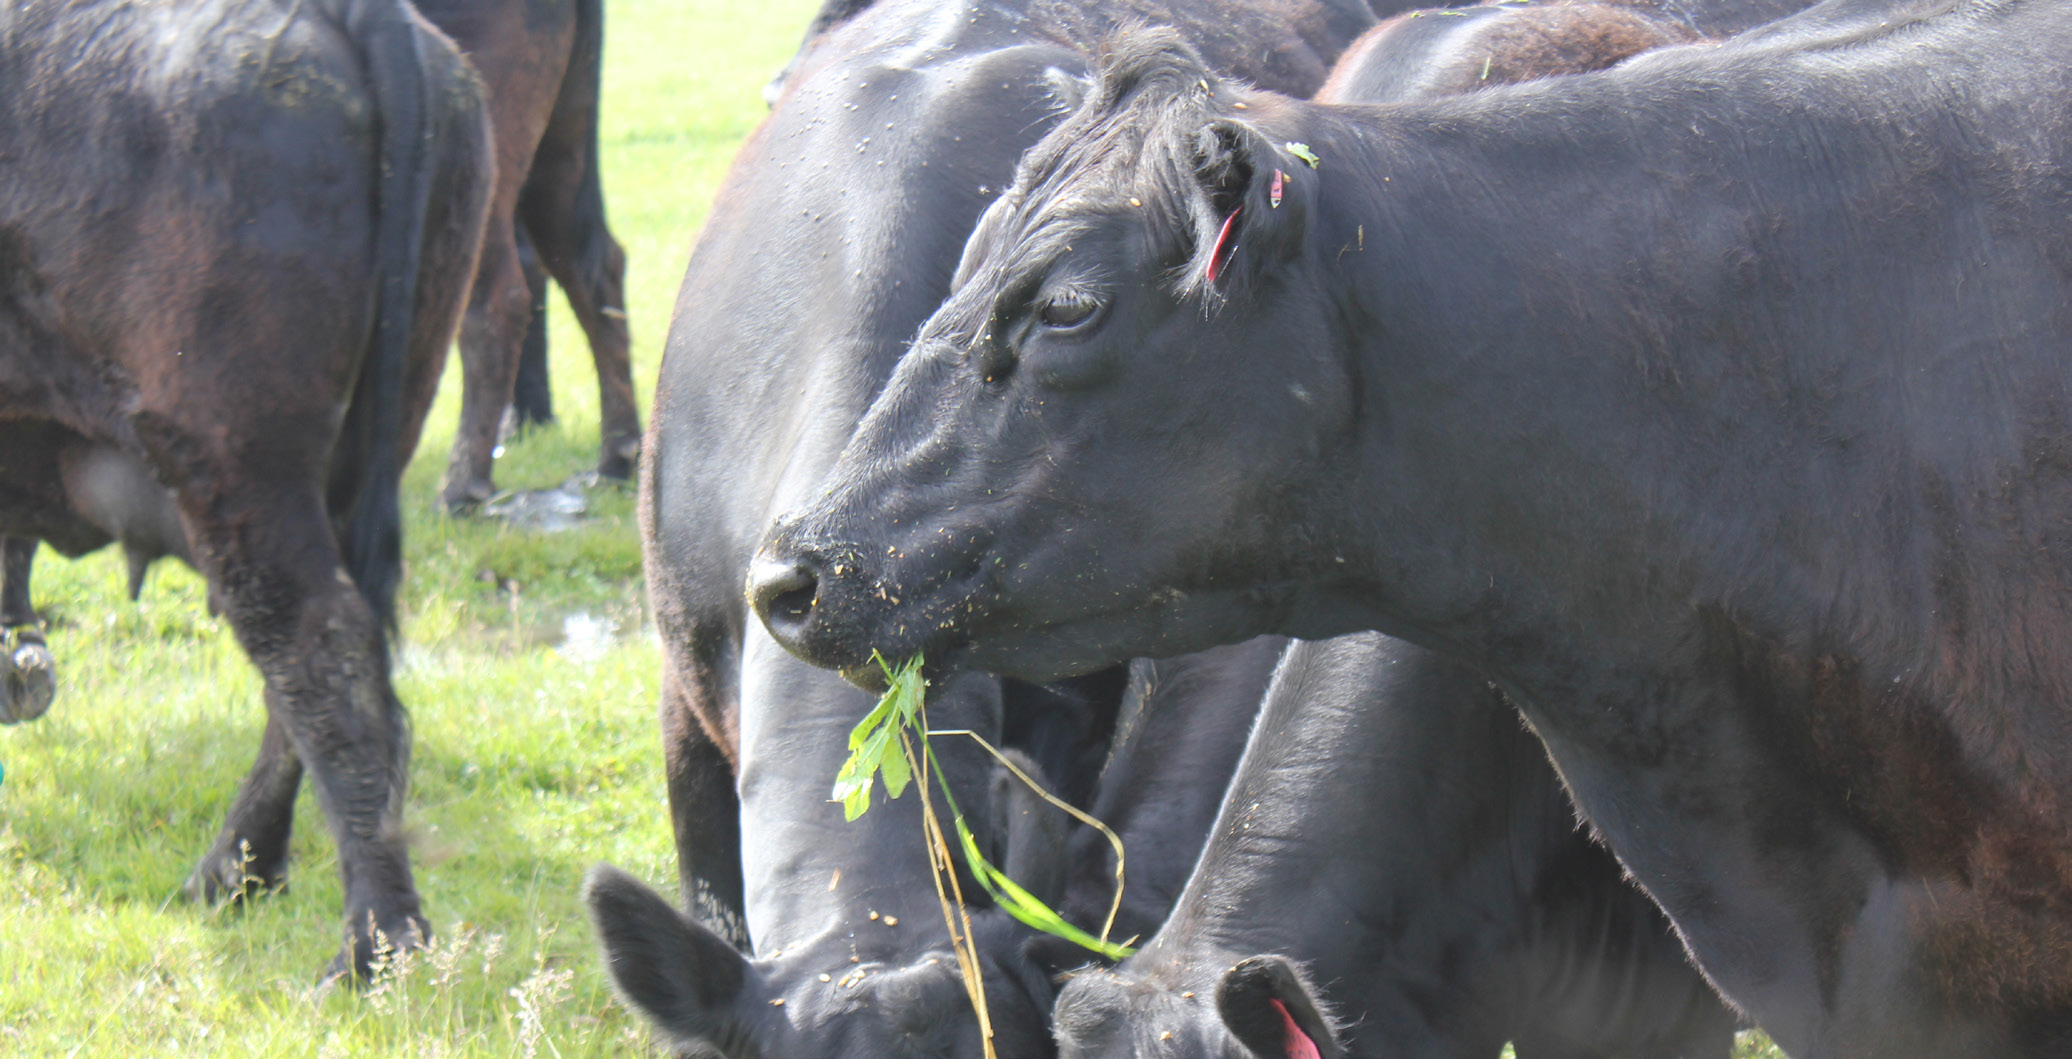 a large black cow with a mouthful of grass stands profile to the camera in a grassy field with other black cows